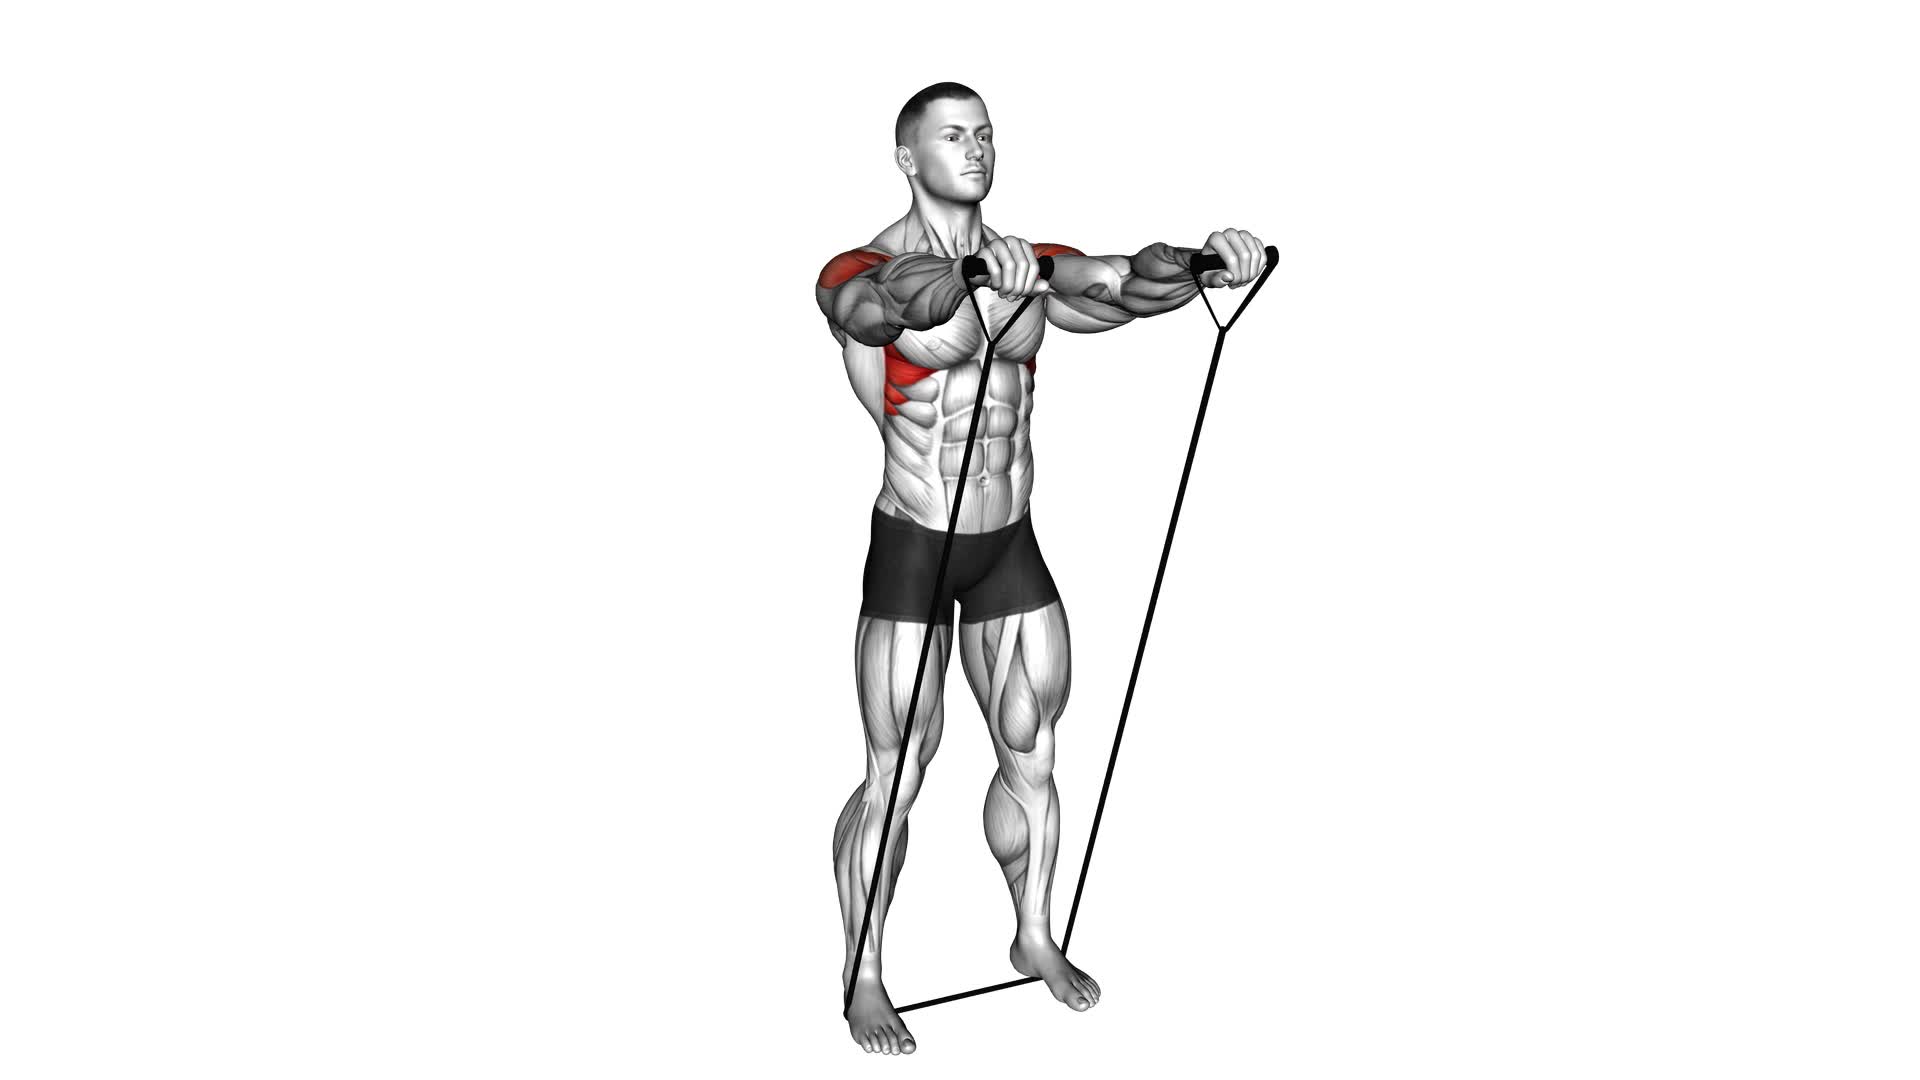 Band Front Raise - Video Exercise Guide & Tips